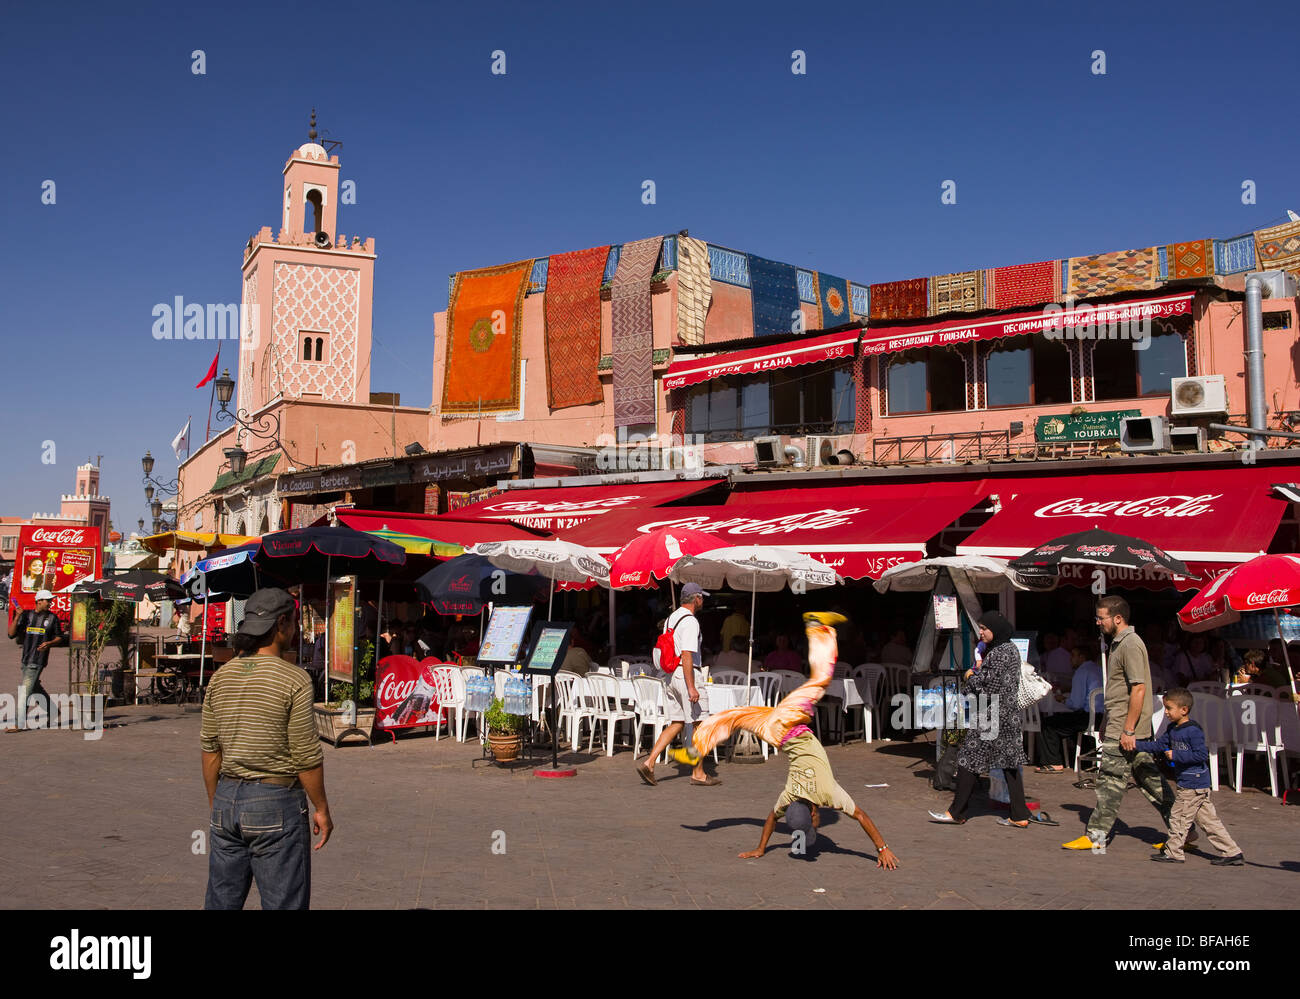 MARRAKESH, MOROCCO - Acrobats tumbling in front of cafe, Djemaa el-Fna main square in the medina. Stock Photo